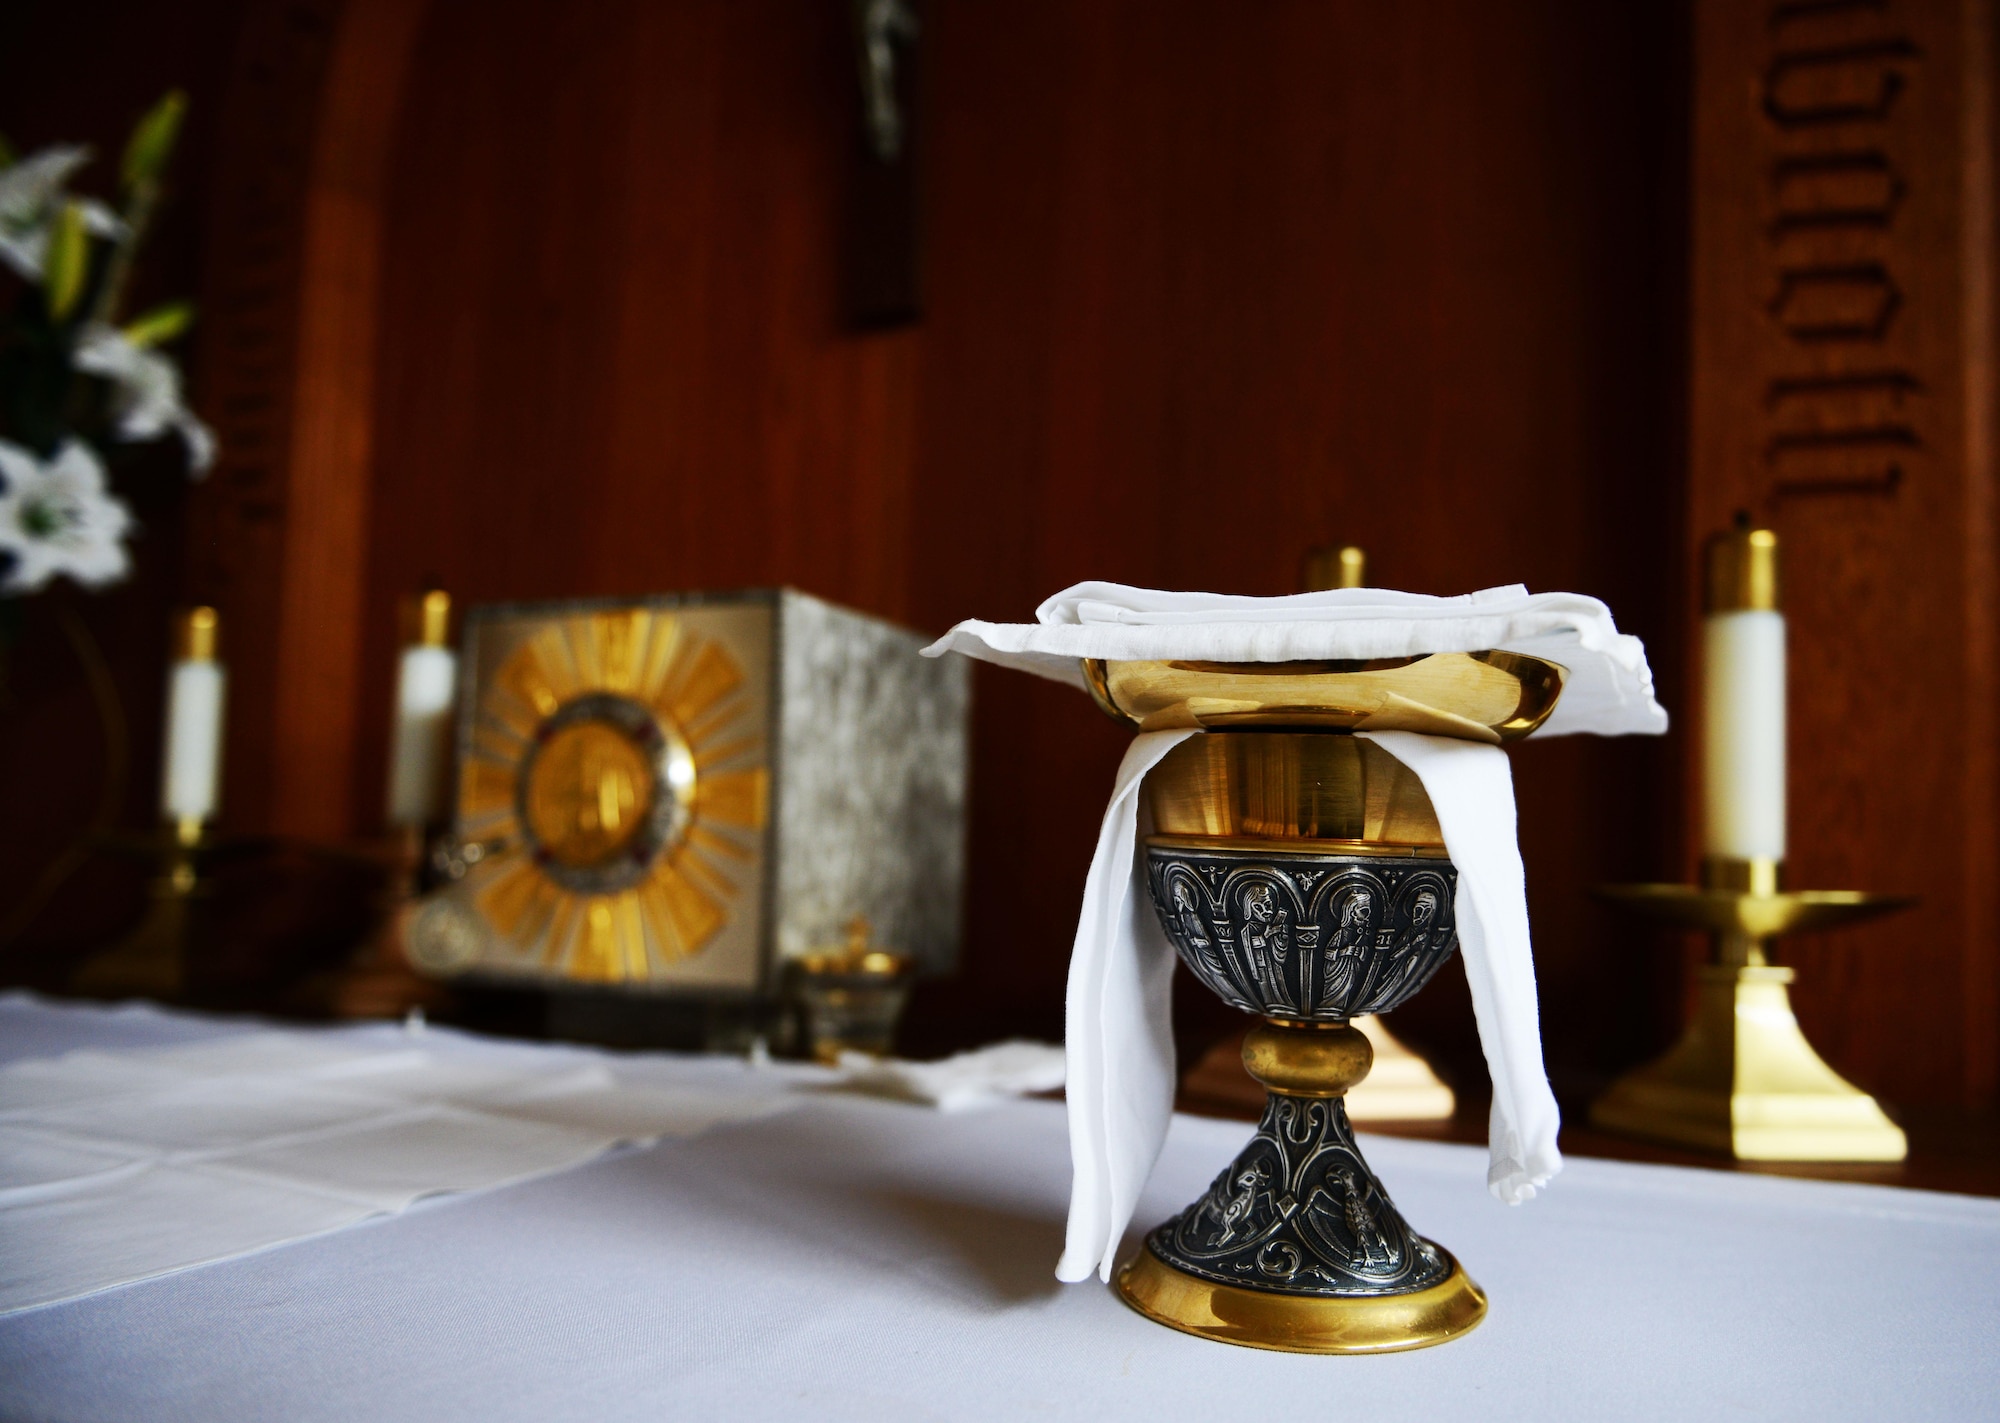 Communion elements for a Catholic mass rest on an altar at Ramstein Air Base, Germany, Sept. 30, 2016. The Ramstein chapel community provides religious services for a variety of faith groups. (U.S. Air Force photo/ Airman 1st Class Joshua Magbanua)